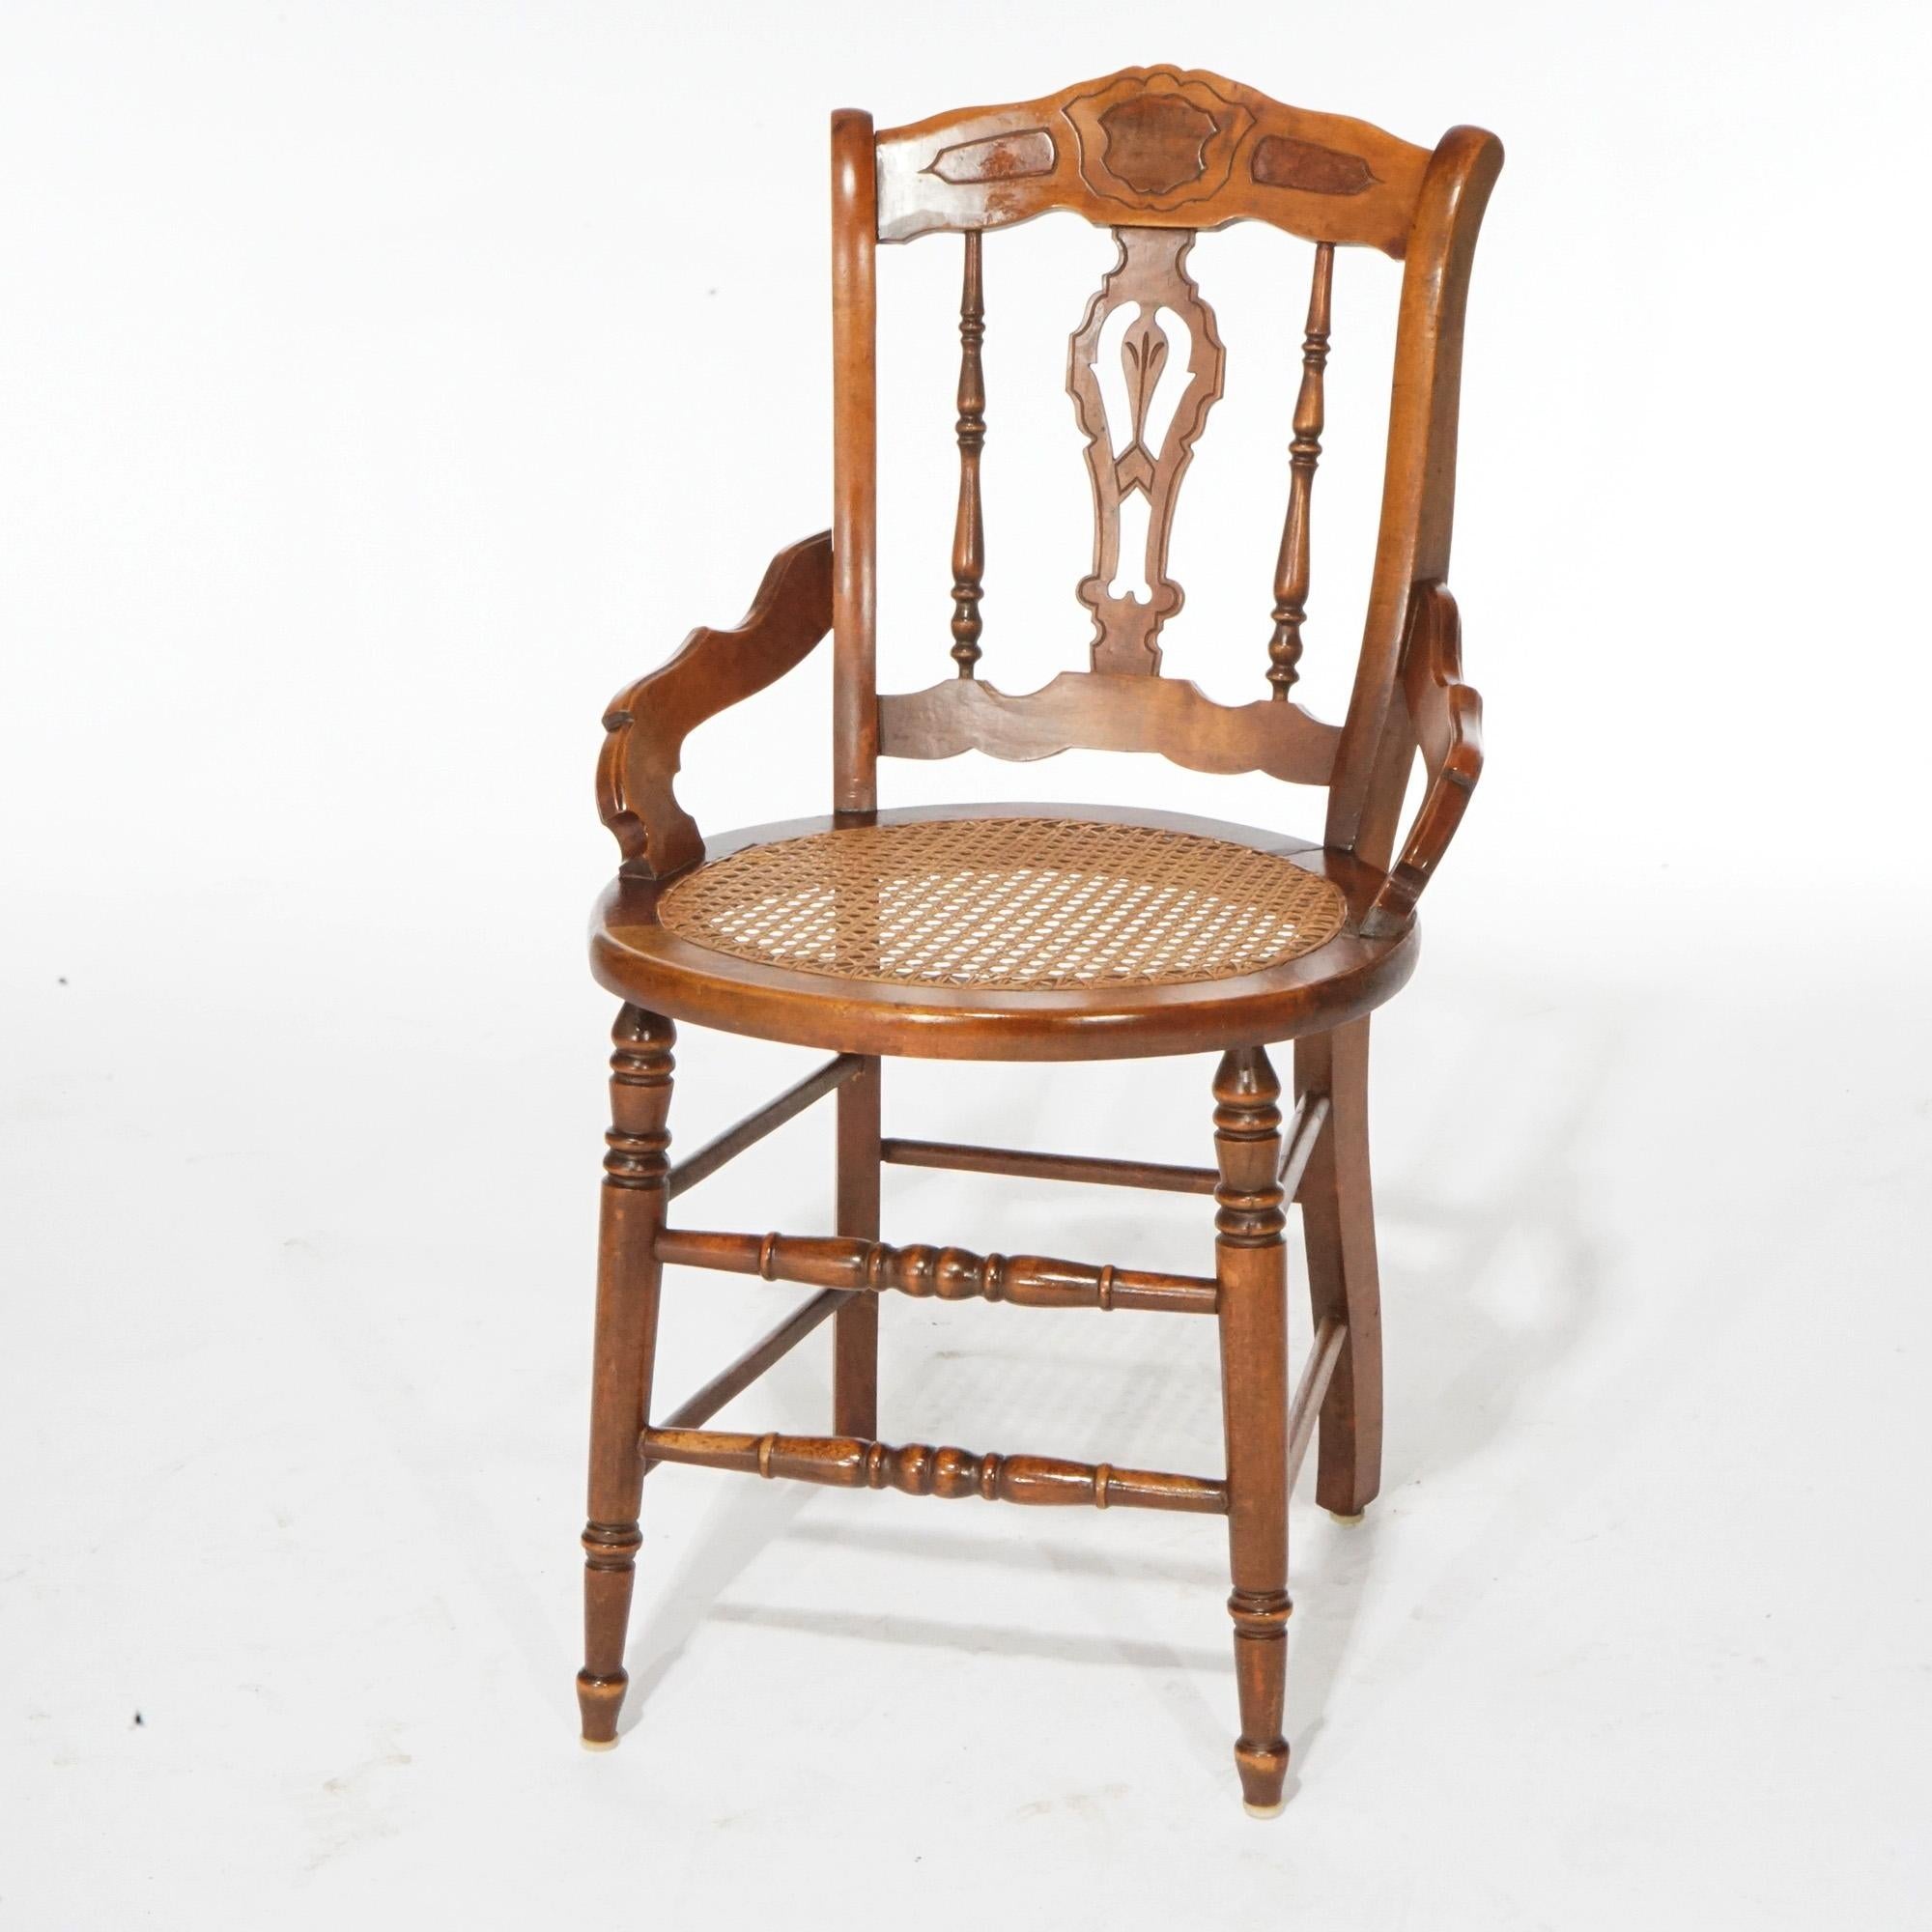 An antique set of four Victorian dining chairs offer walnut construction with shaped rail having burl insets over cane seats and raised on turned legs, c1890.

Measures - 33.75''H x 20''W x 19.75''D; 18.25'' seat height.